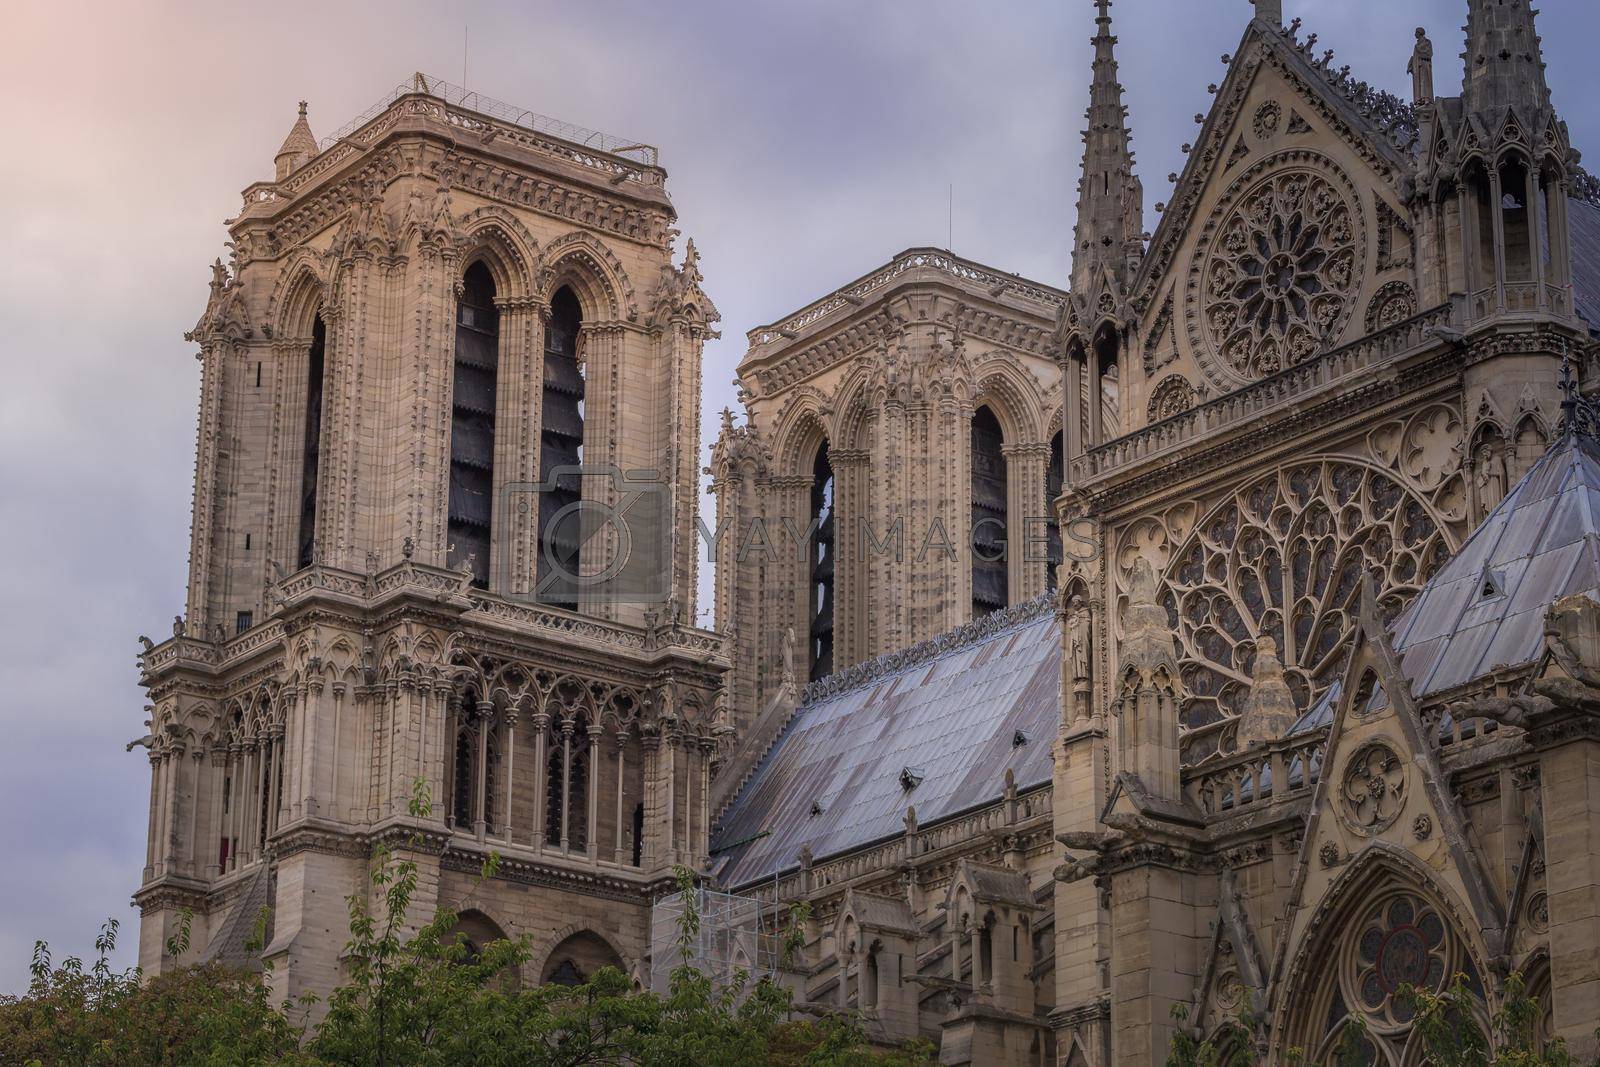 Royalty free image of Notre Dame of Paris towers, columns and archs, side view, France by positivetravelart